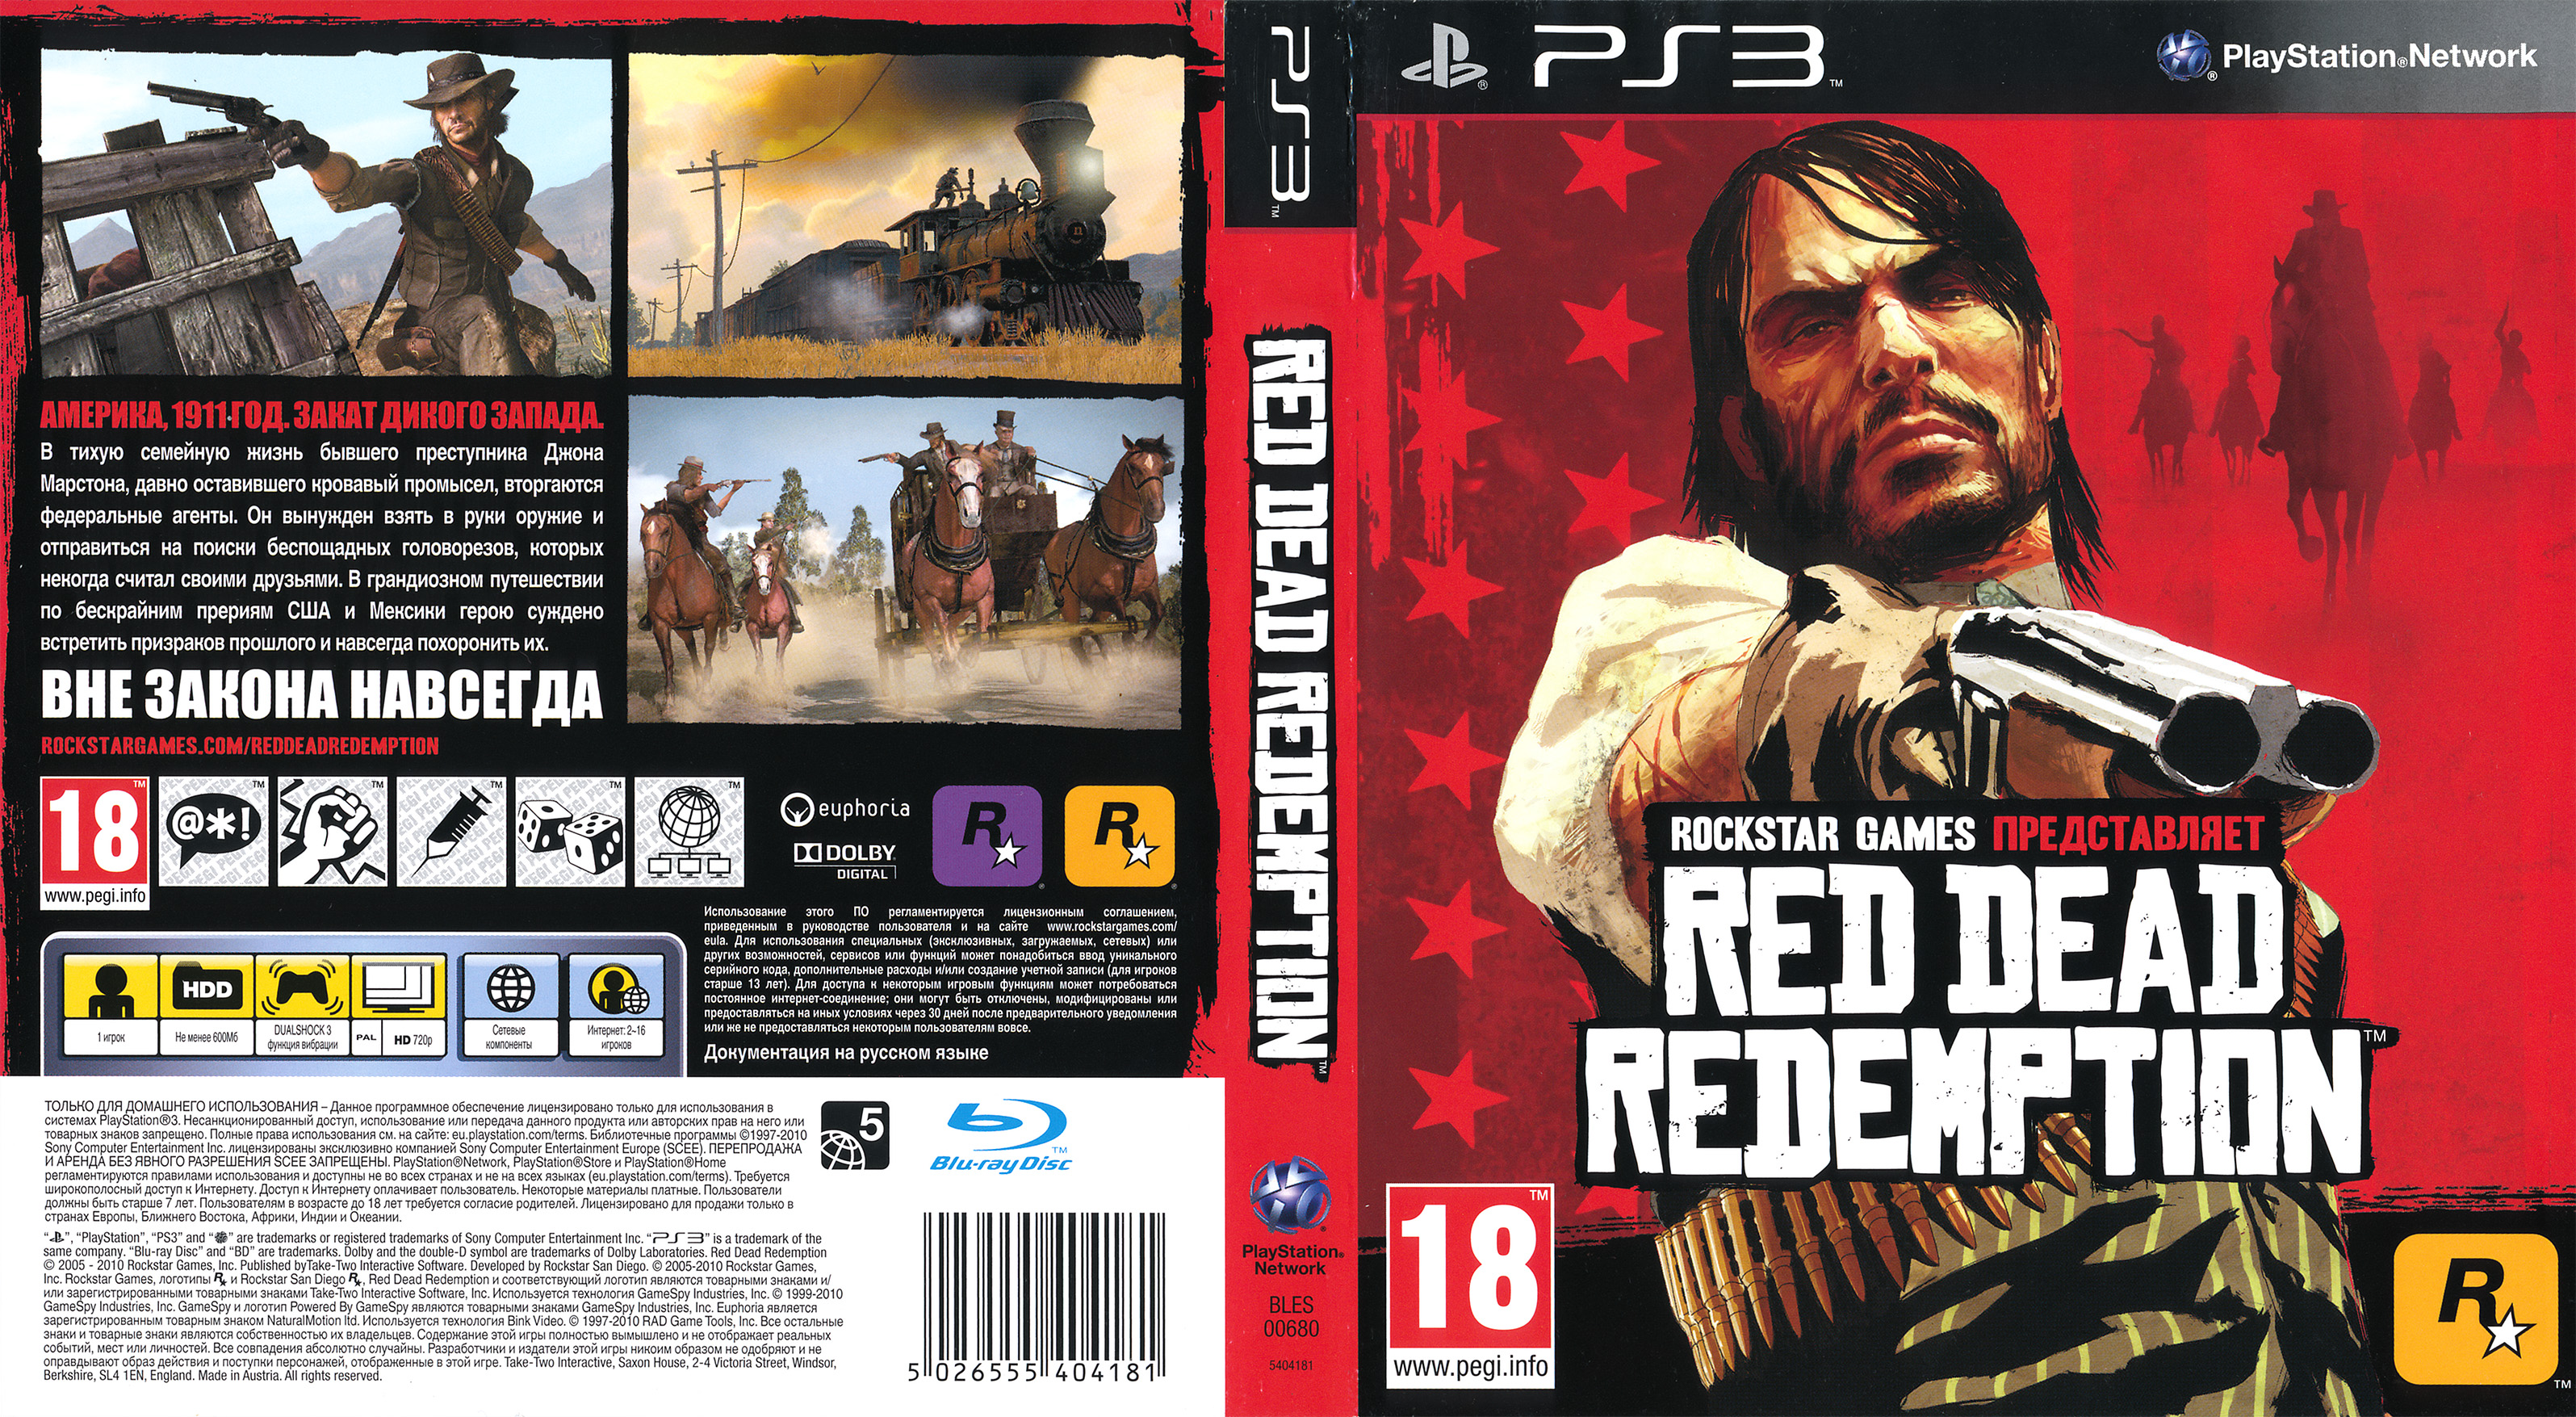 Игры ps4 red. Rdr ps3 диск. Red Dead Redemption Sony PLAYSTATION 3. Red Dead Redemption ps3 диск. Red Dead Redemption 1 диск ps3.